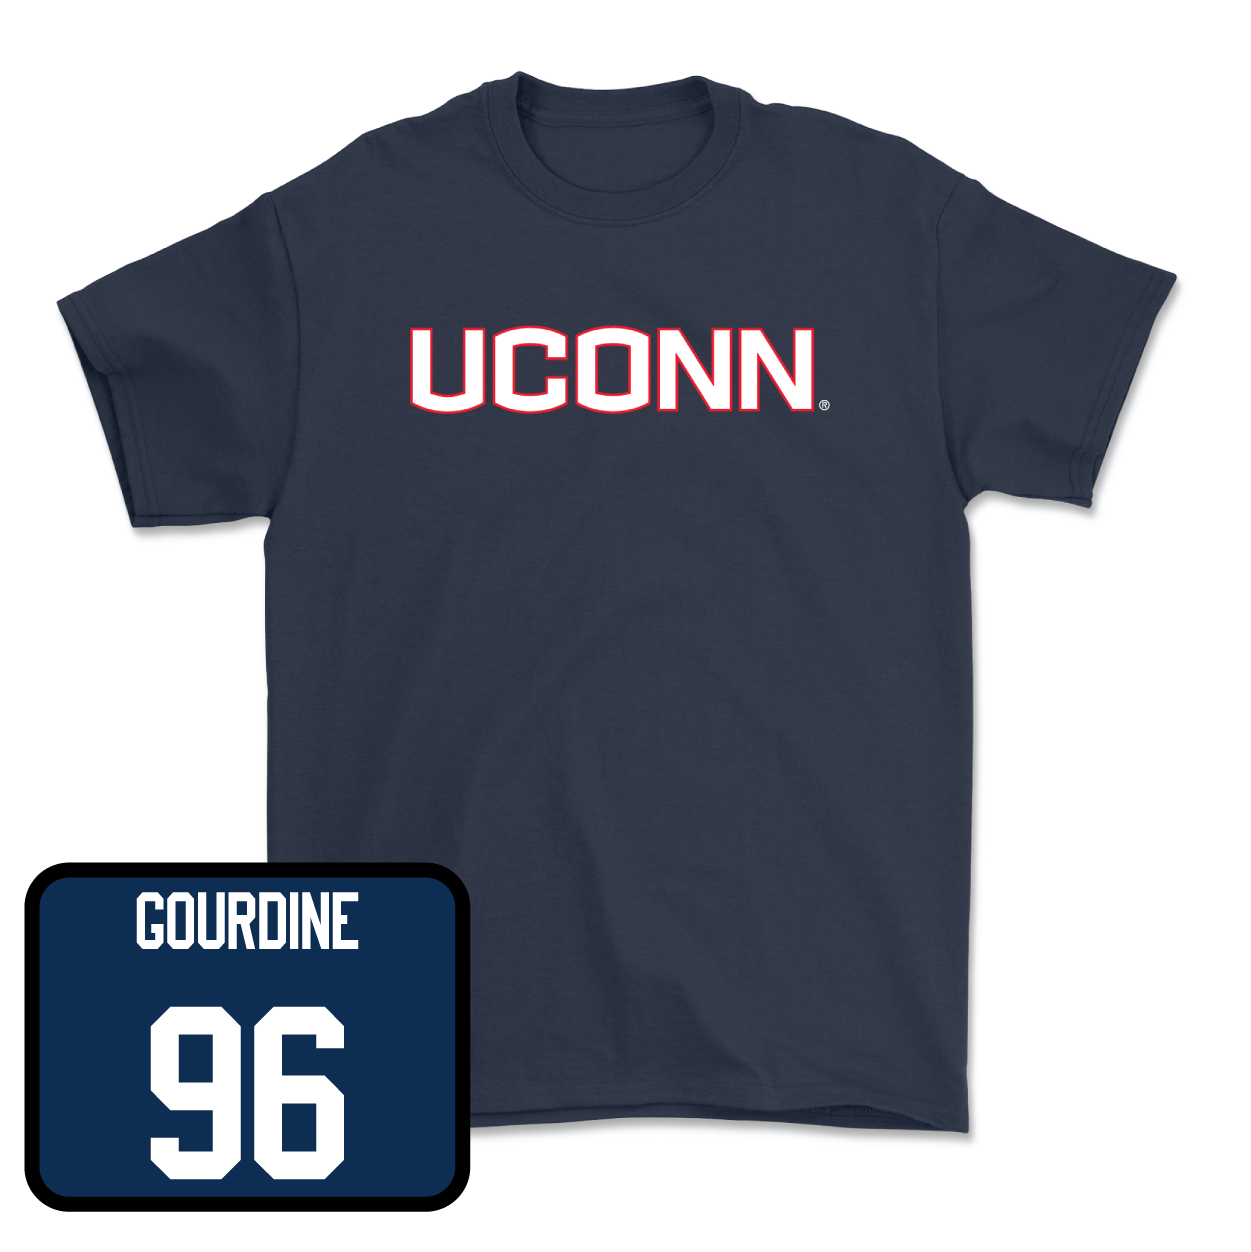 Navy Football UConn Tee Youth Large / Dal'mont Gourdine | #96